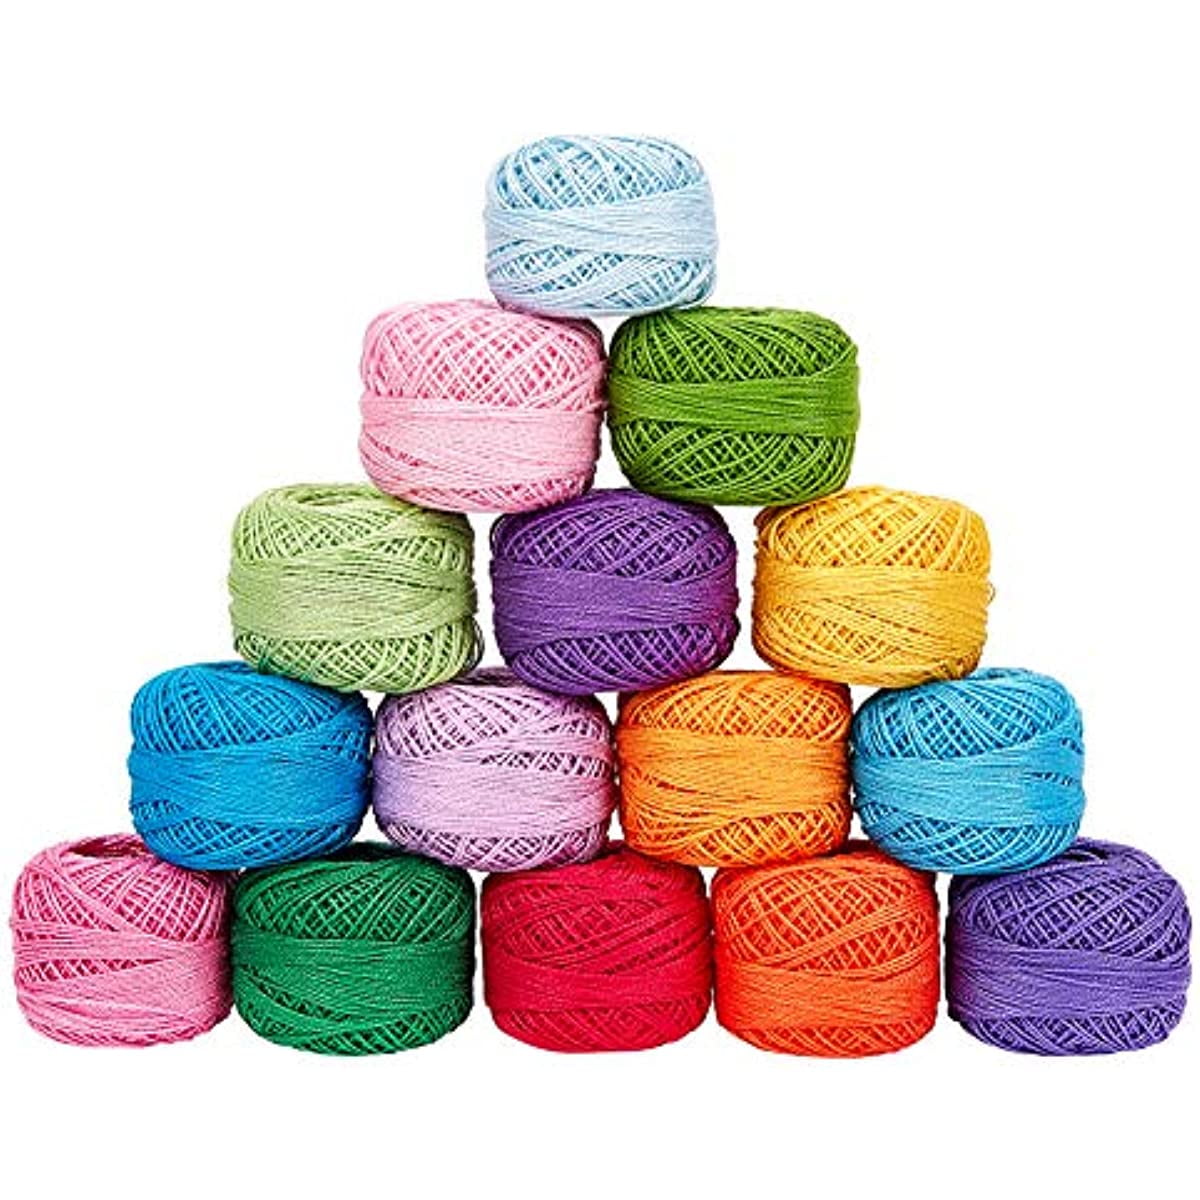  Mandala Crafts Mercerized Cotton Thread for Sewing Machine Hand  Sewing in 5 Assorted Colors - 50WT Cotton Cone Sewing Thread – 6000 YDs  50S/2 Machine Quilting Thread Cotton Embroidery Thread Combo 6